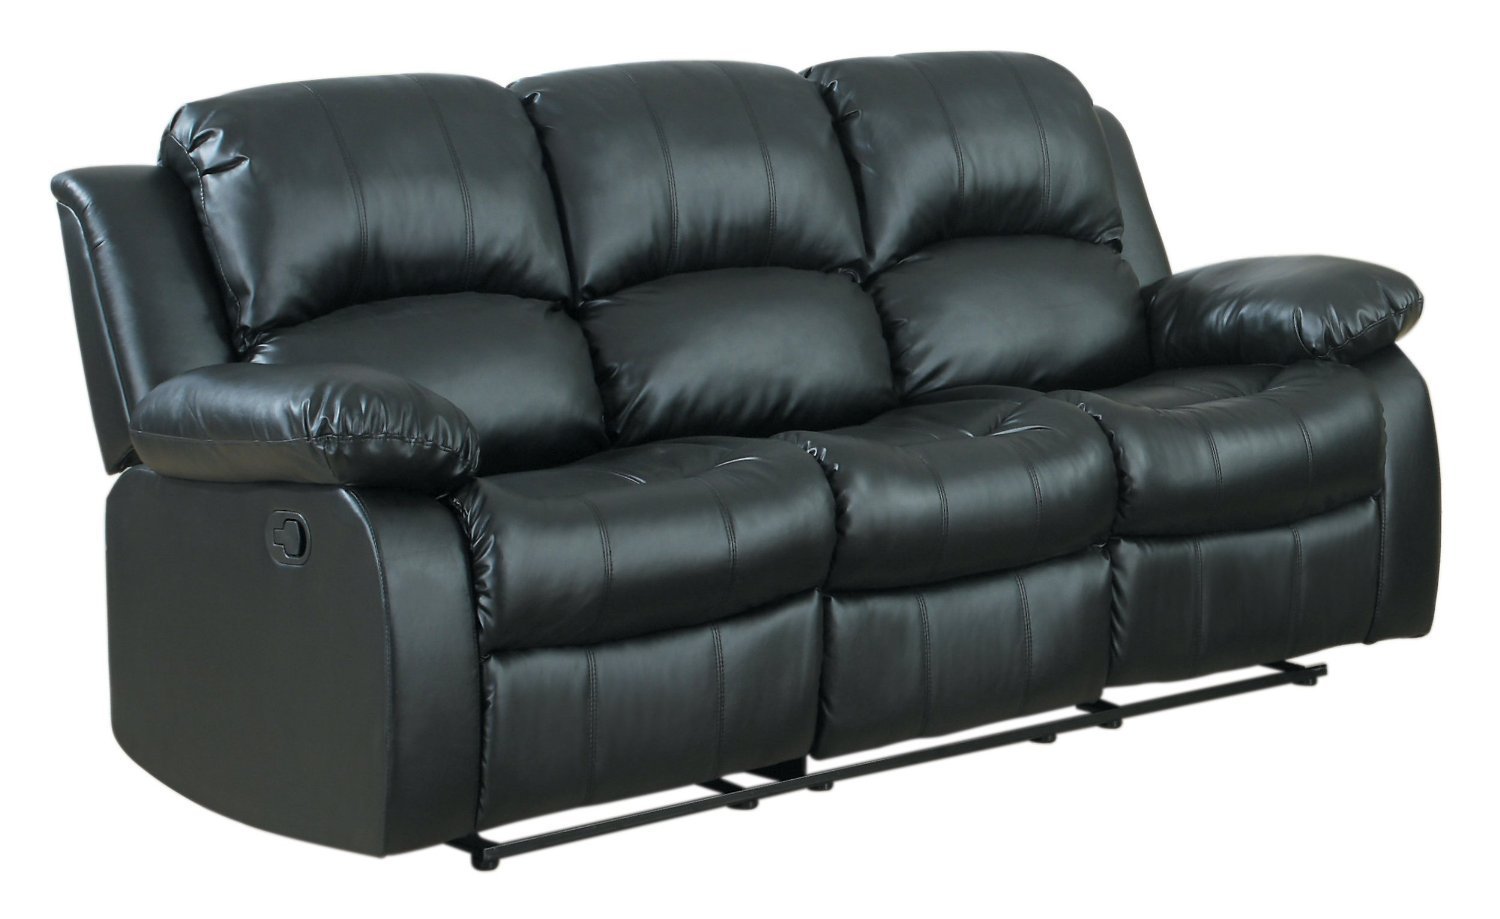 3 seat Sofa Double Recliner Black / Brown Bonded Leather (Black)